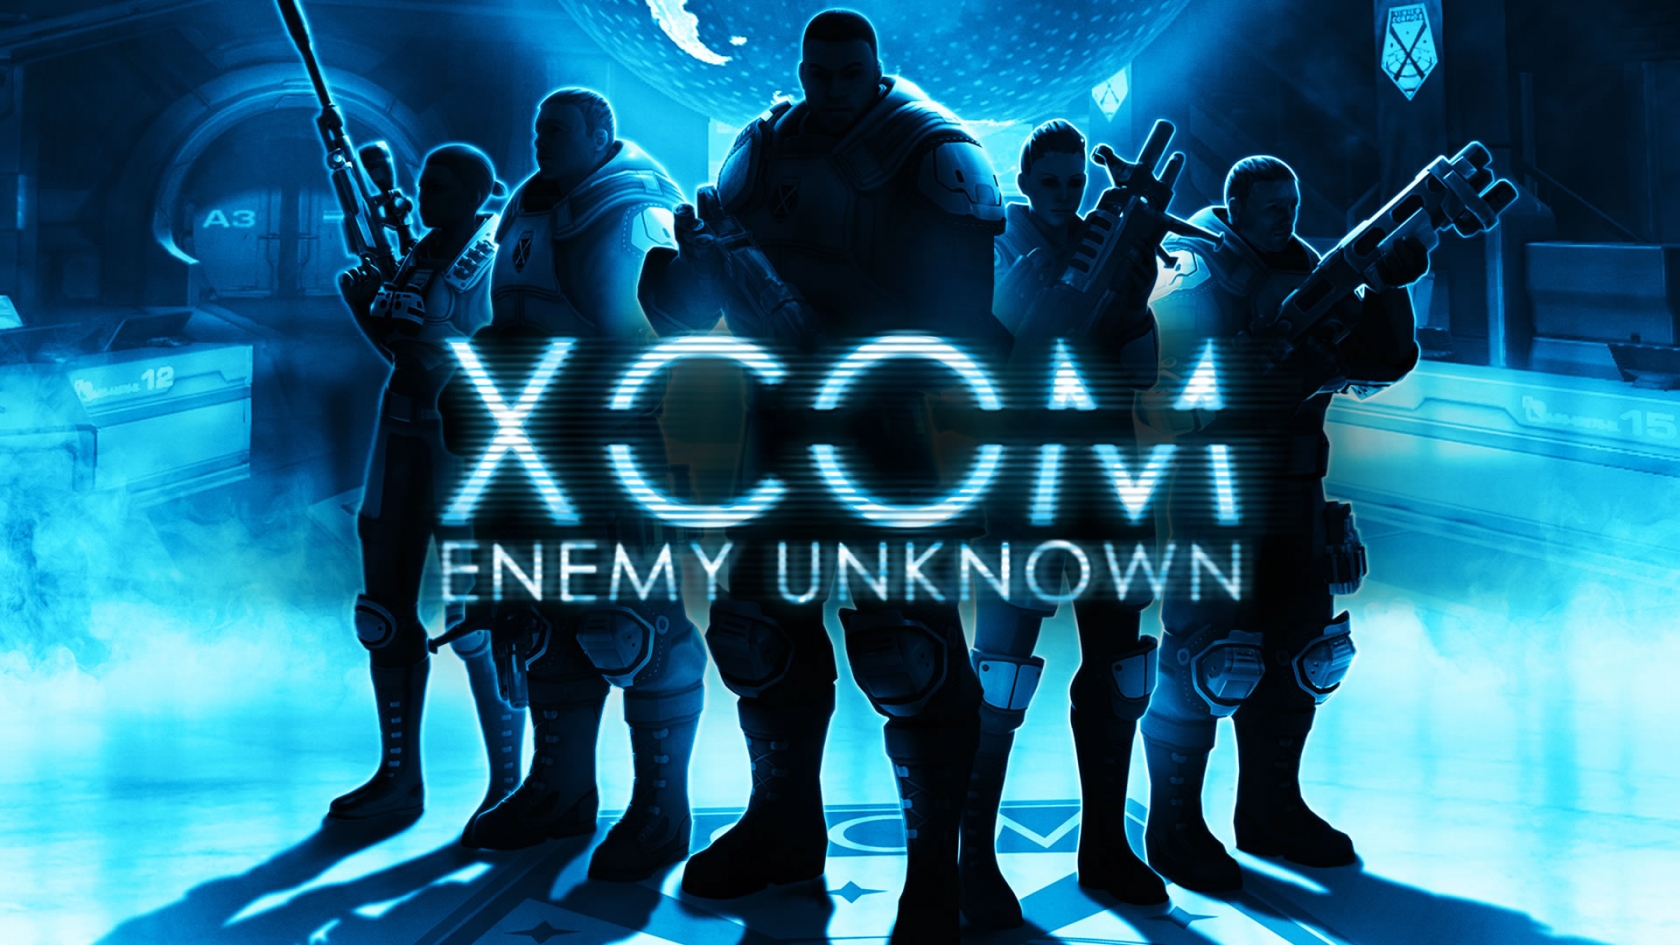 XCOM Enemy Unknown for 1680 x 945 HDTV resolution